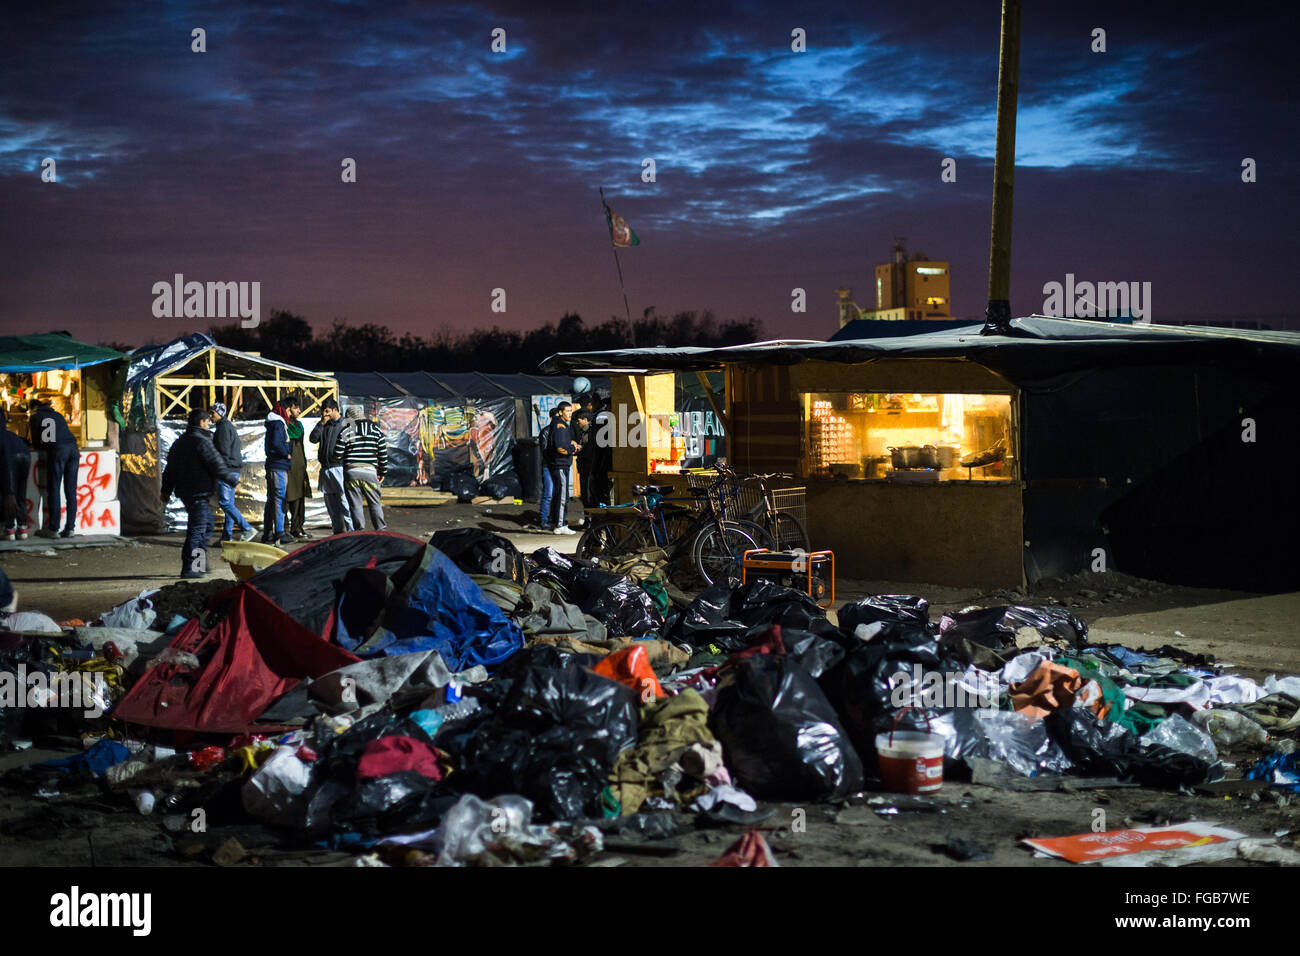 Rubbish builds up in an open area in front of a cafe restaurant and shop in the Jungle refugee camp, Calais, France. Stock Photo